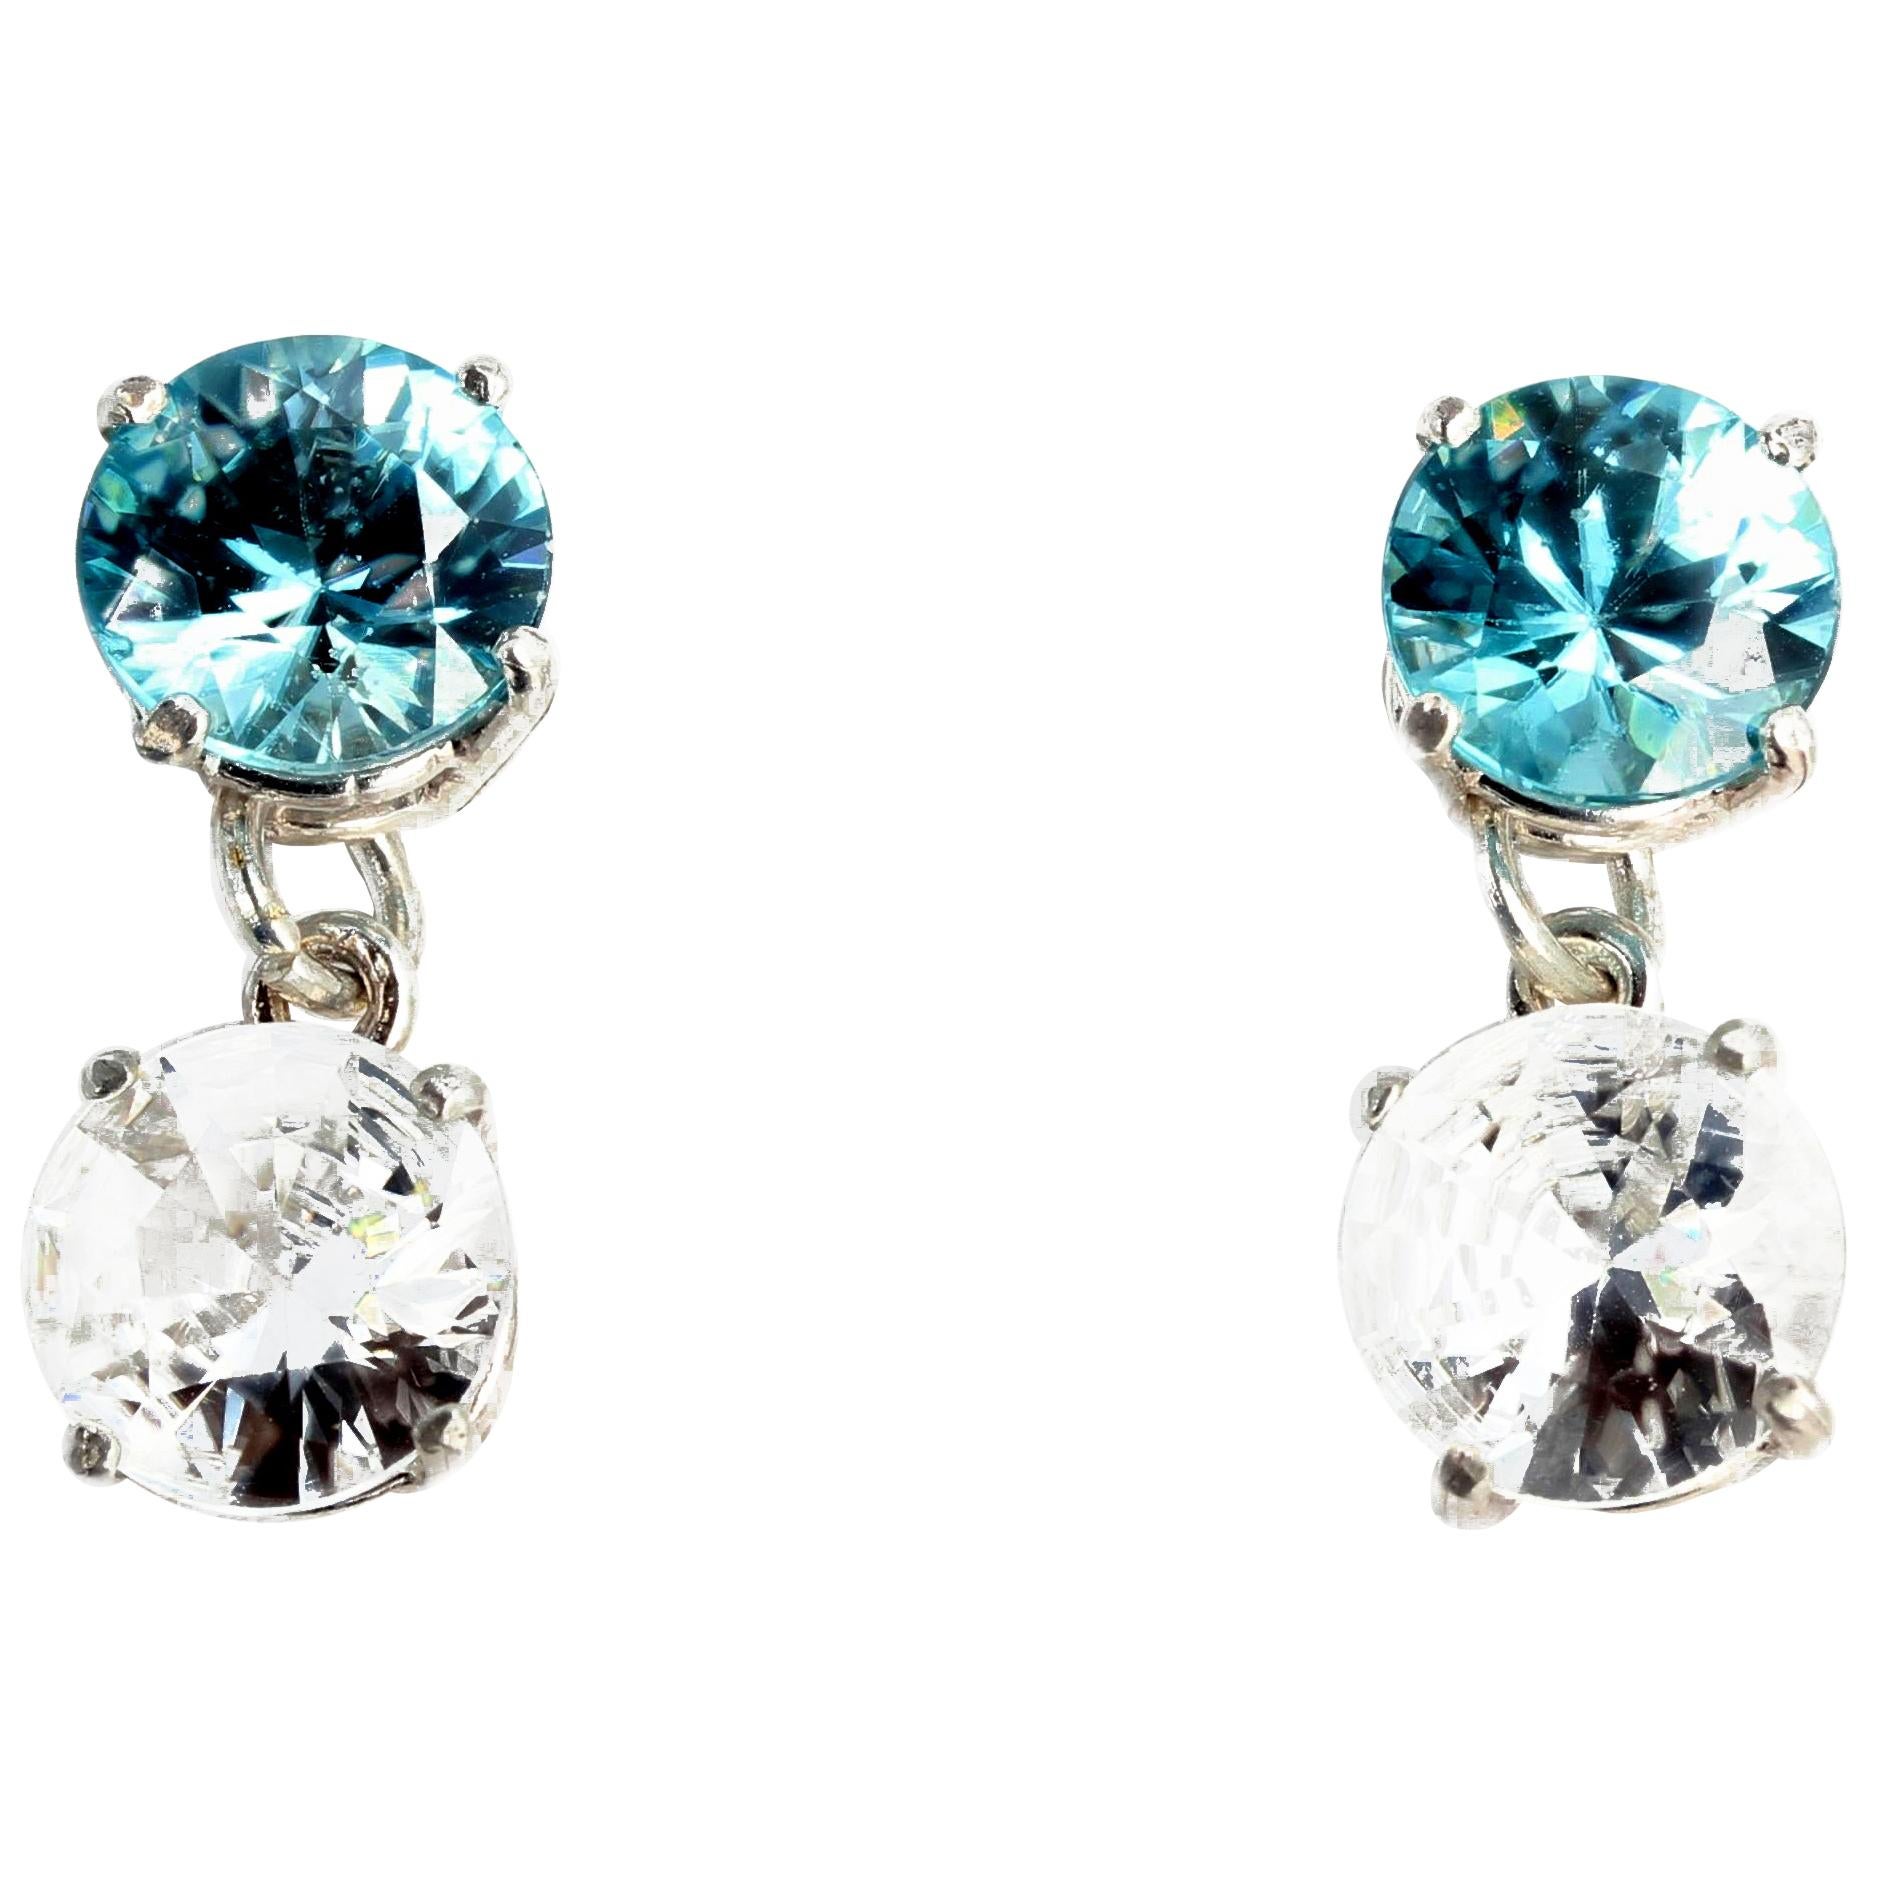 5.69 carats total of brilliant blue round (8.8 mm) unique Zircons dangle 6 carats total of elegant glittering white Zircons (8.9 mm) set in handmade sterling silver stud earrings.  They hang .8 inches long. If you wish faster delivery on your